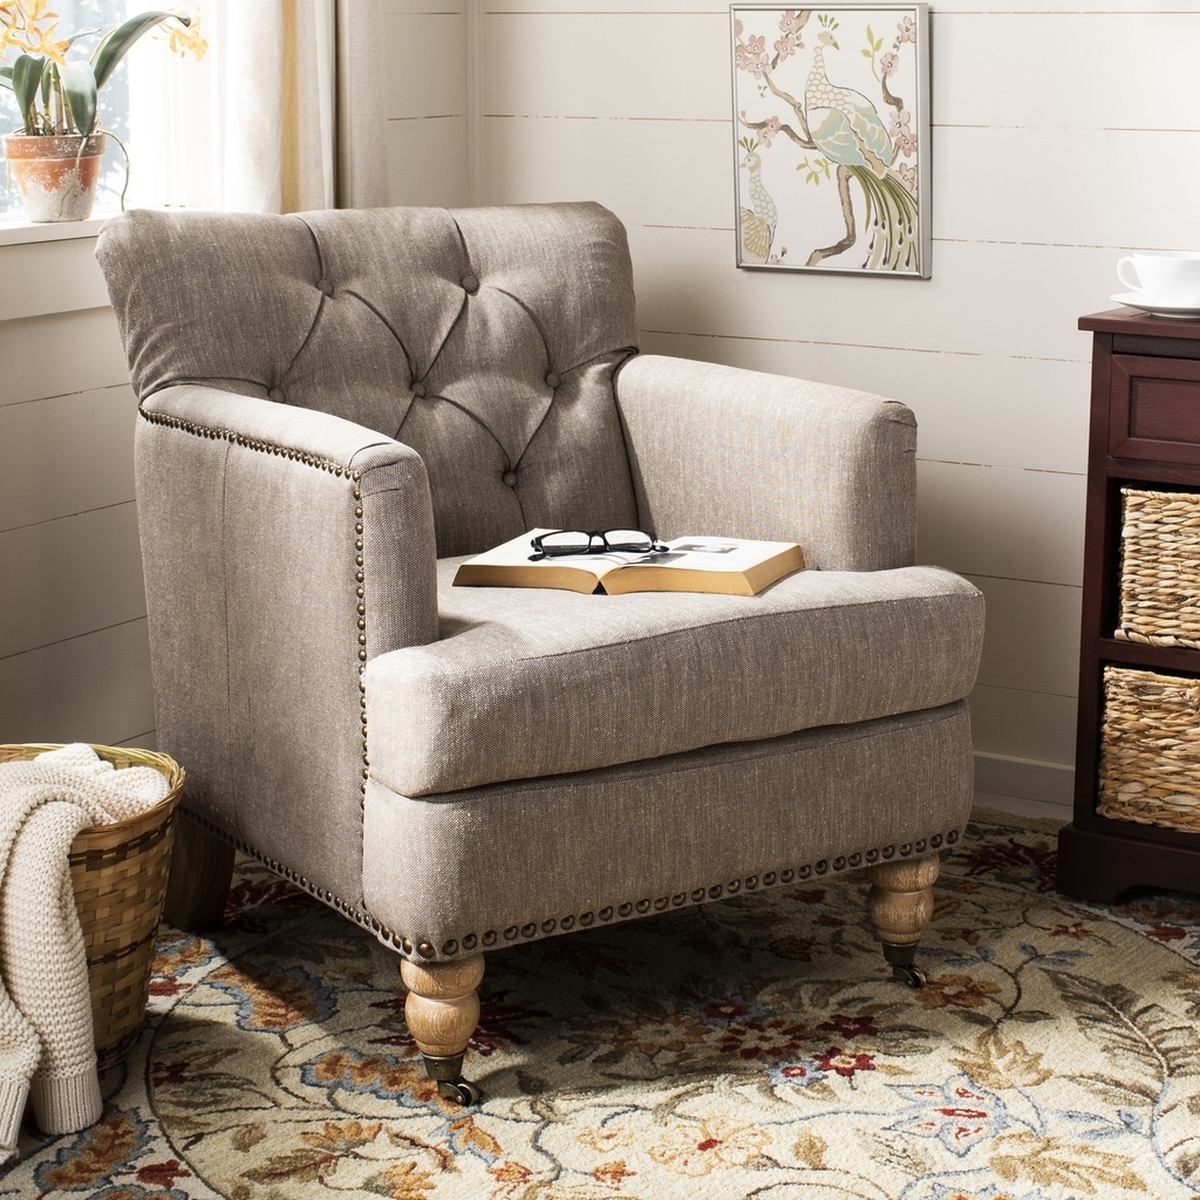 Colin Tufted Club Chair - Taupe/White Wash - Arlo Home - Image 1